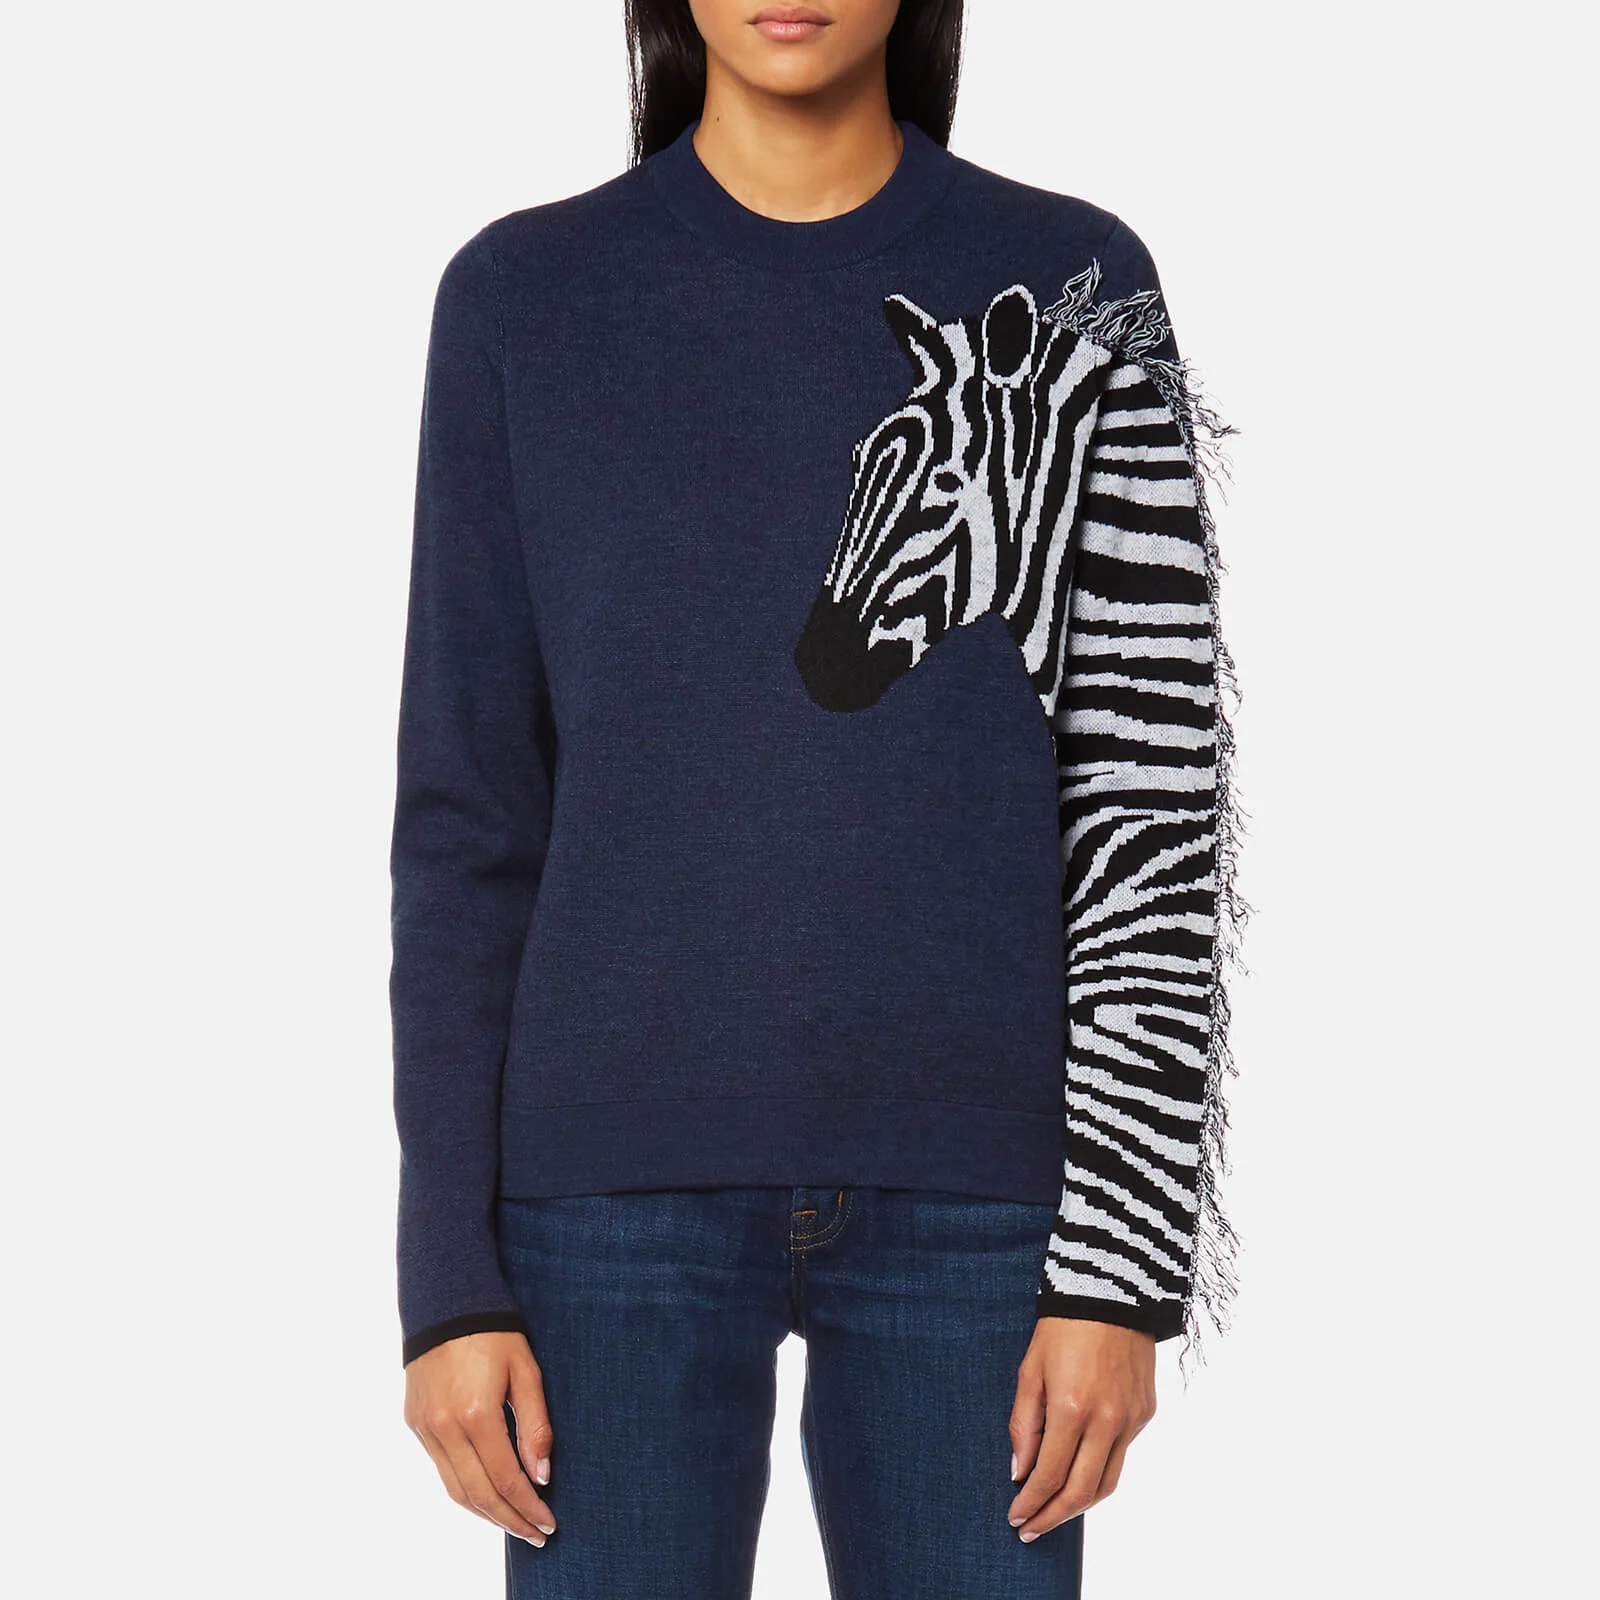 PS by Paul Smith Women's Zebra Knitted Jumper - Navy Image 1